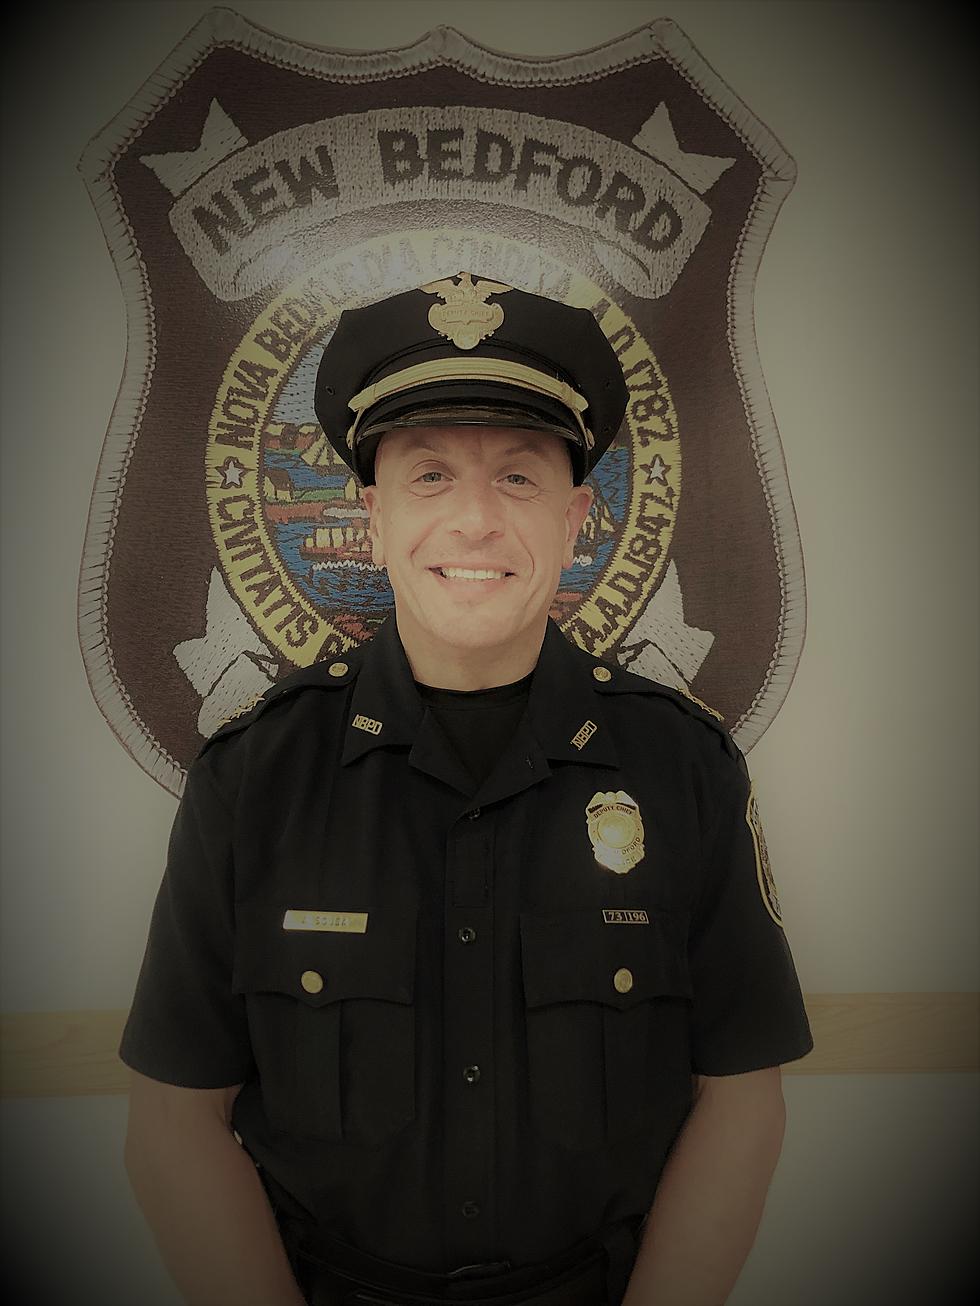 Acting Deputy Chief Named to Permanent Role